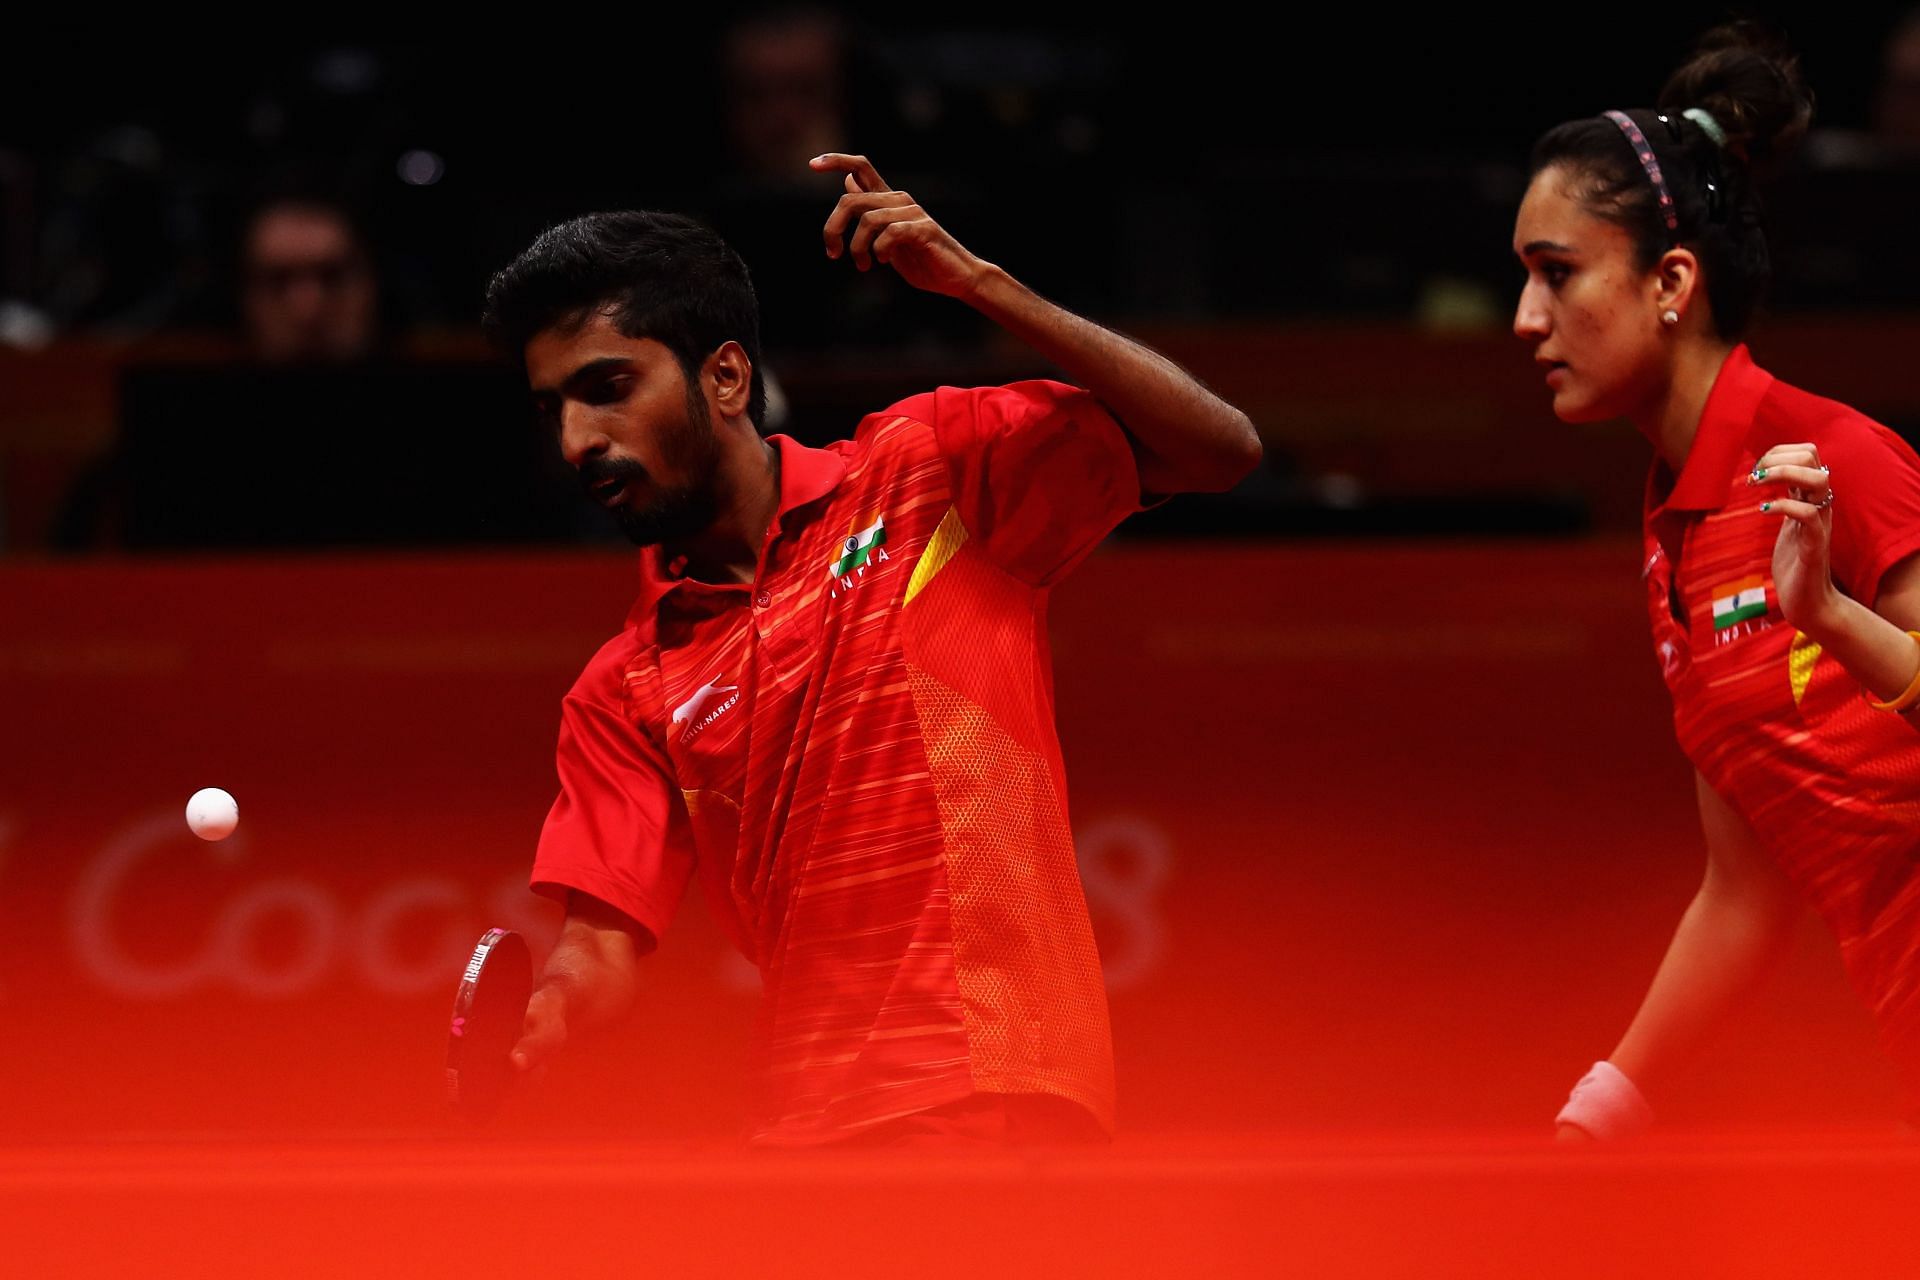 The Indian mixed doubles pair of Sathiyan Gnanasekaran and Manika Batra will be in action at the WTT Contender in Tunis. (PC: Getty Images)